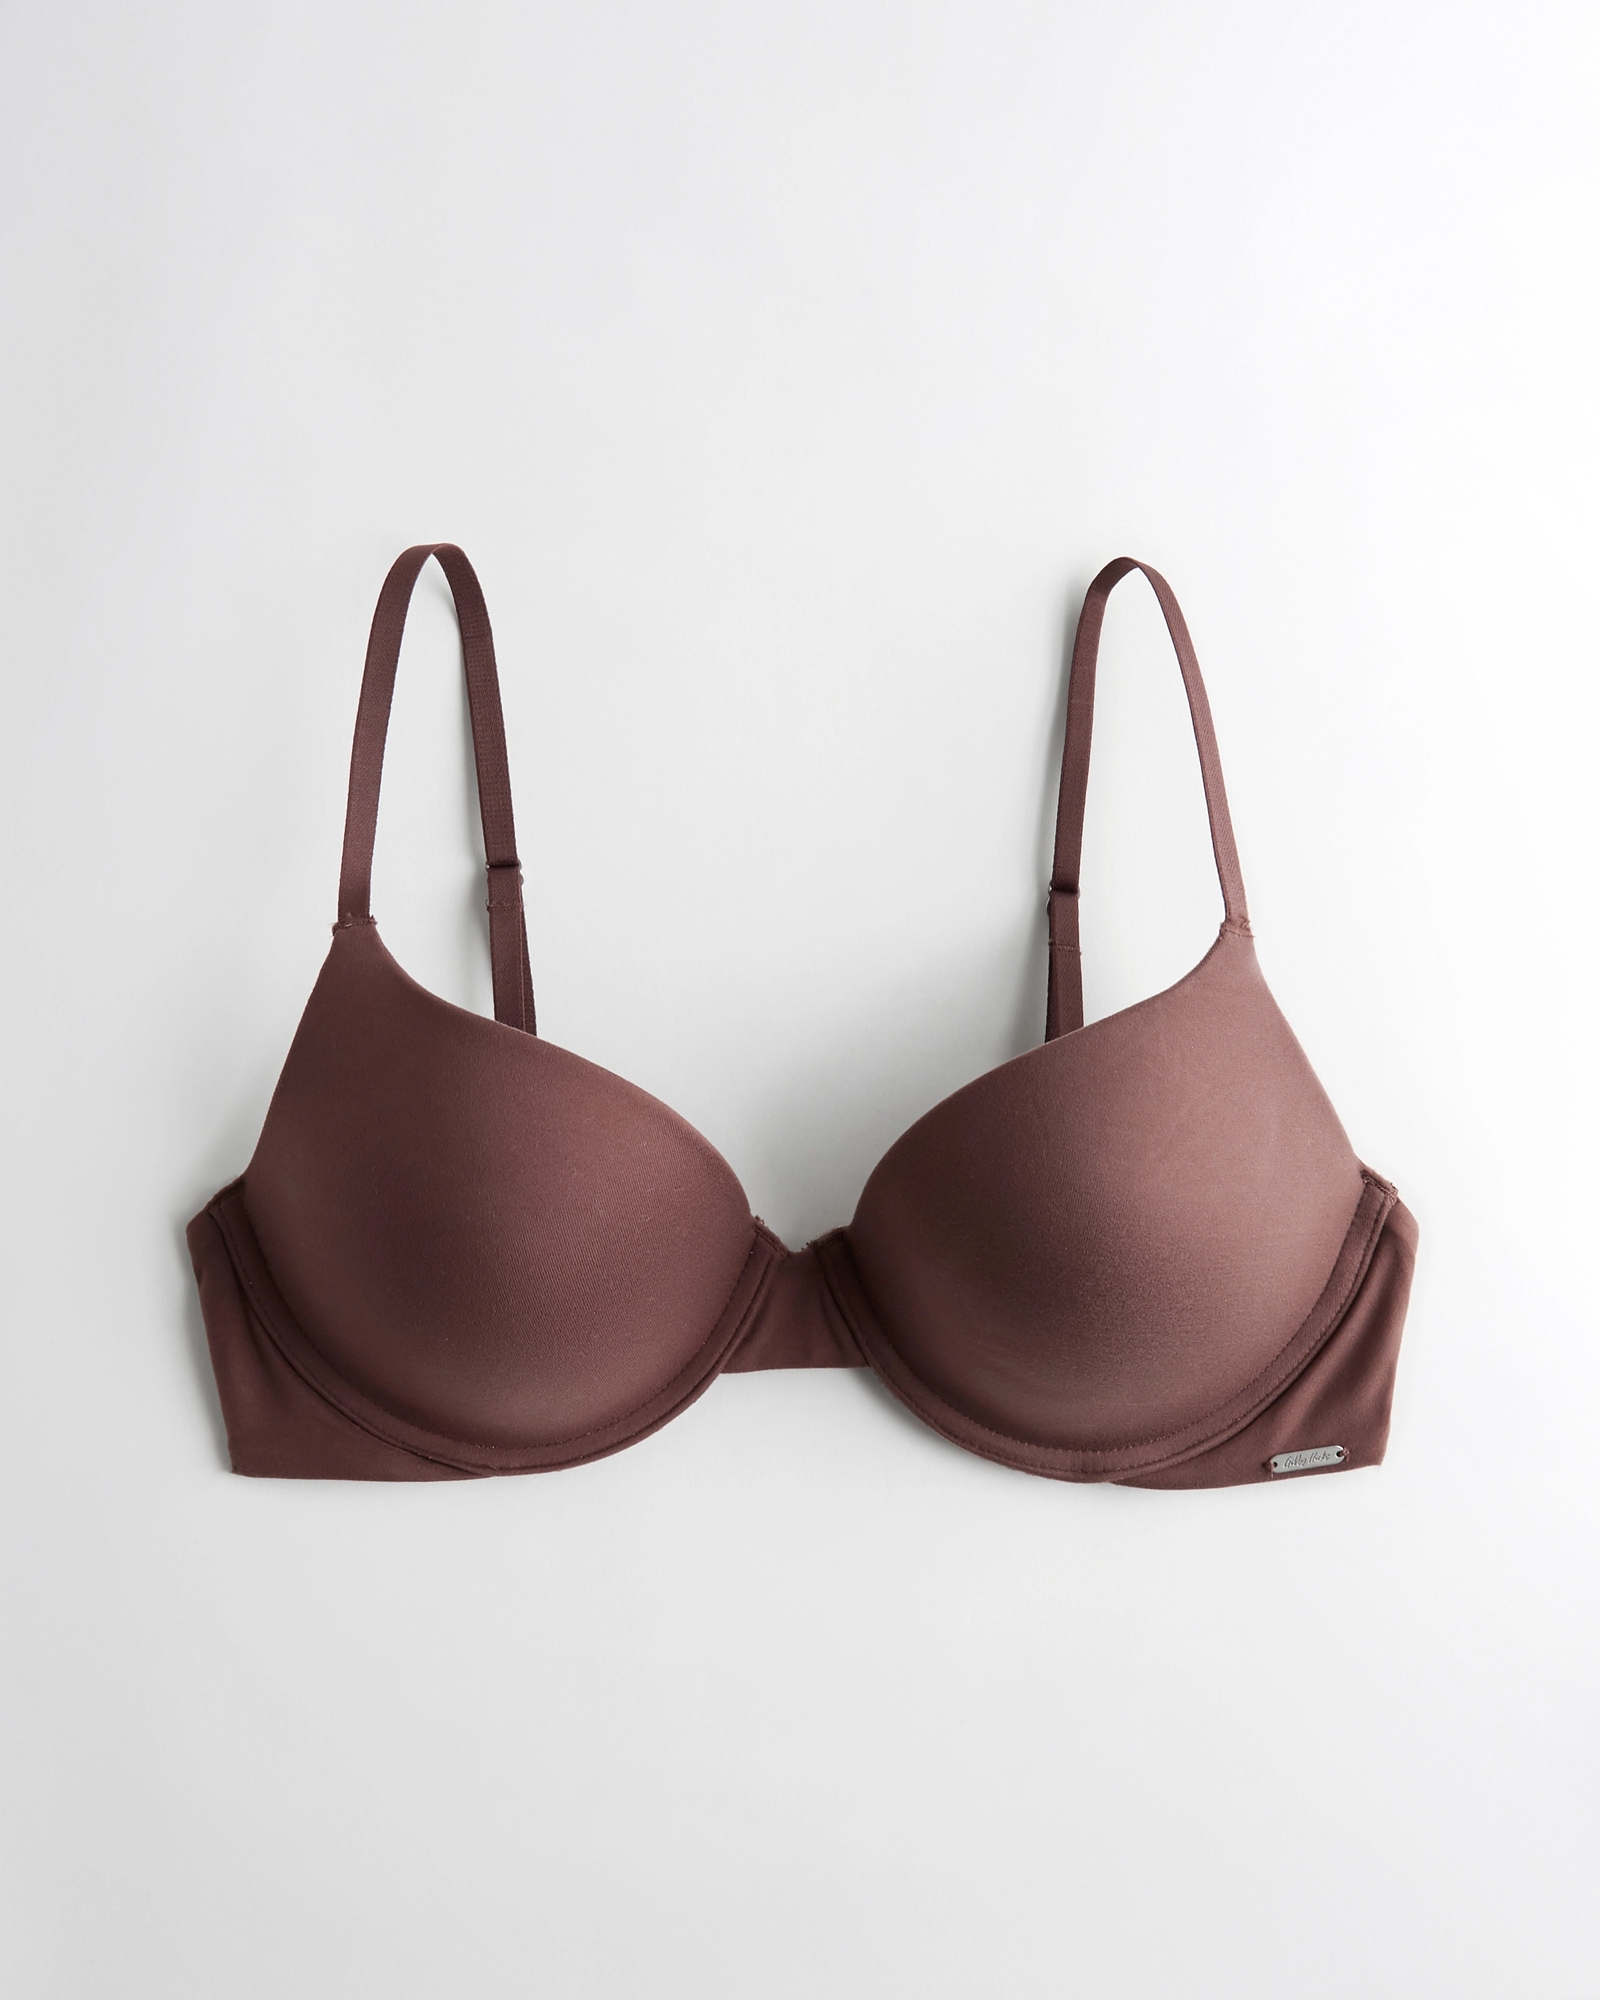 Push-Up Bras: Women Feel More Confident In Push-Up Bras, Study